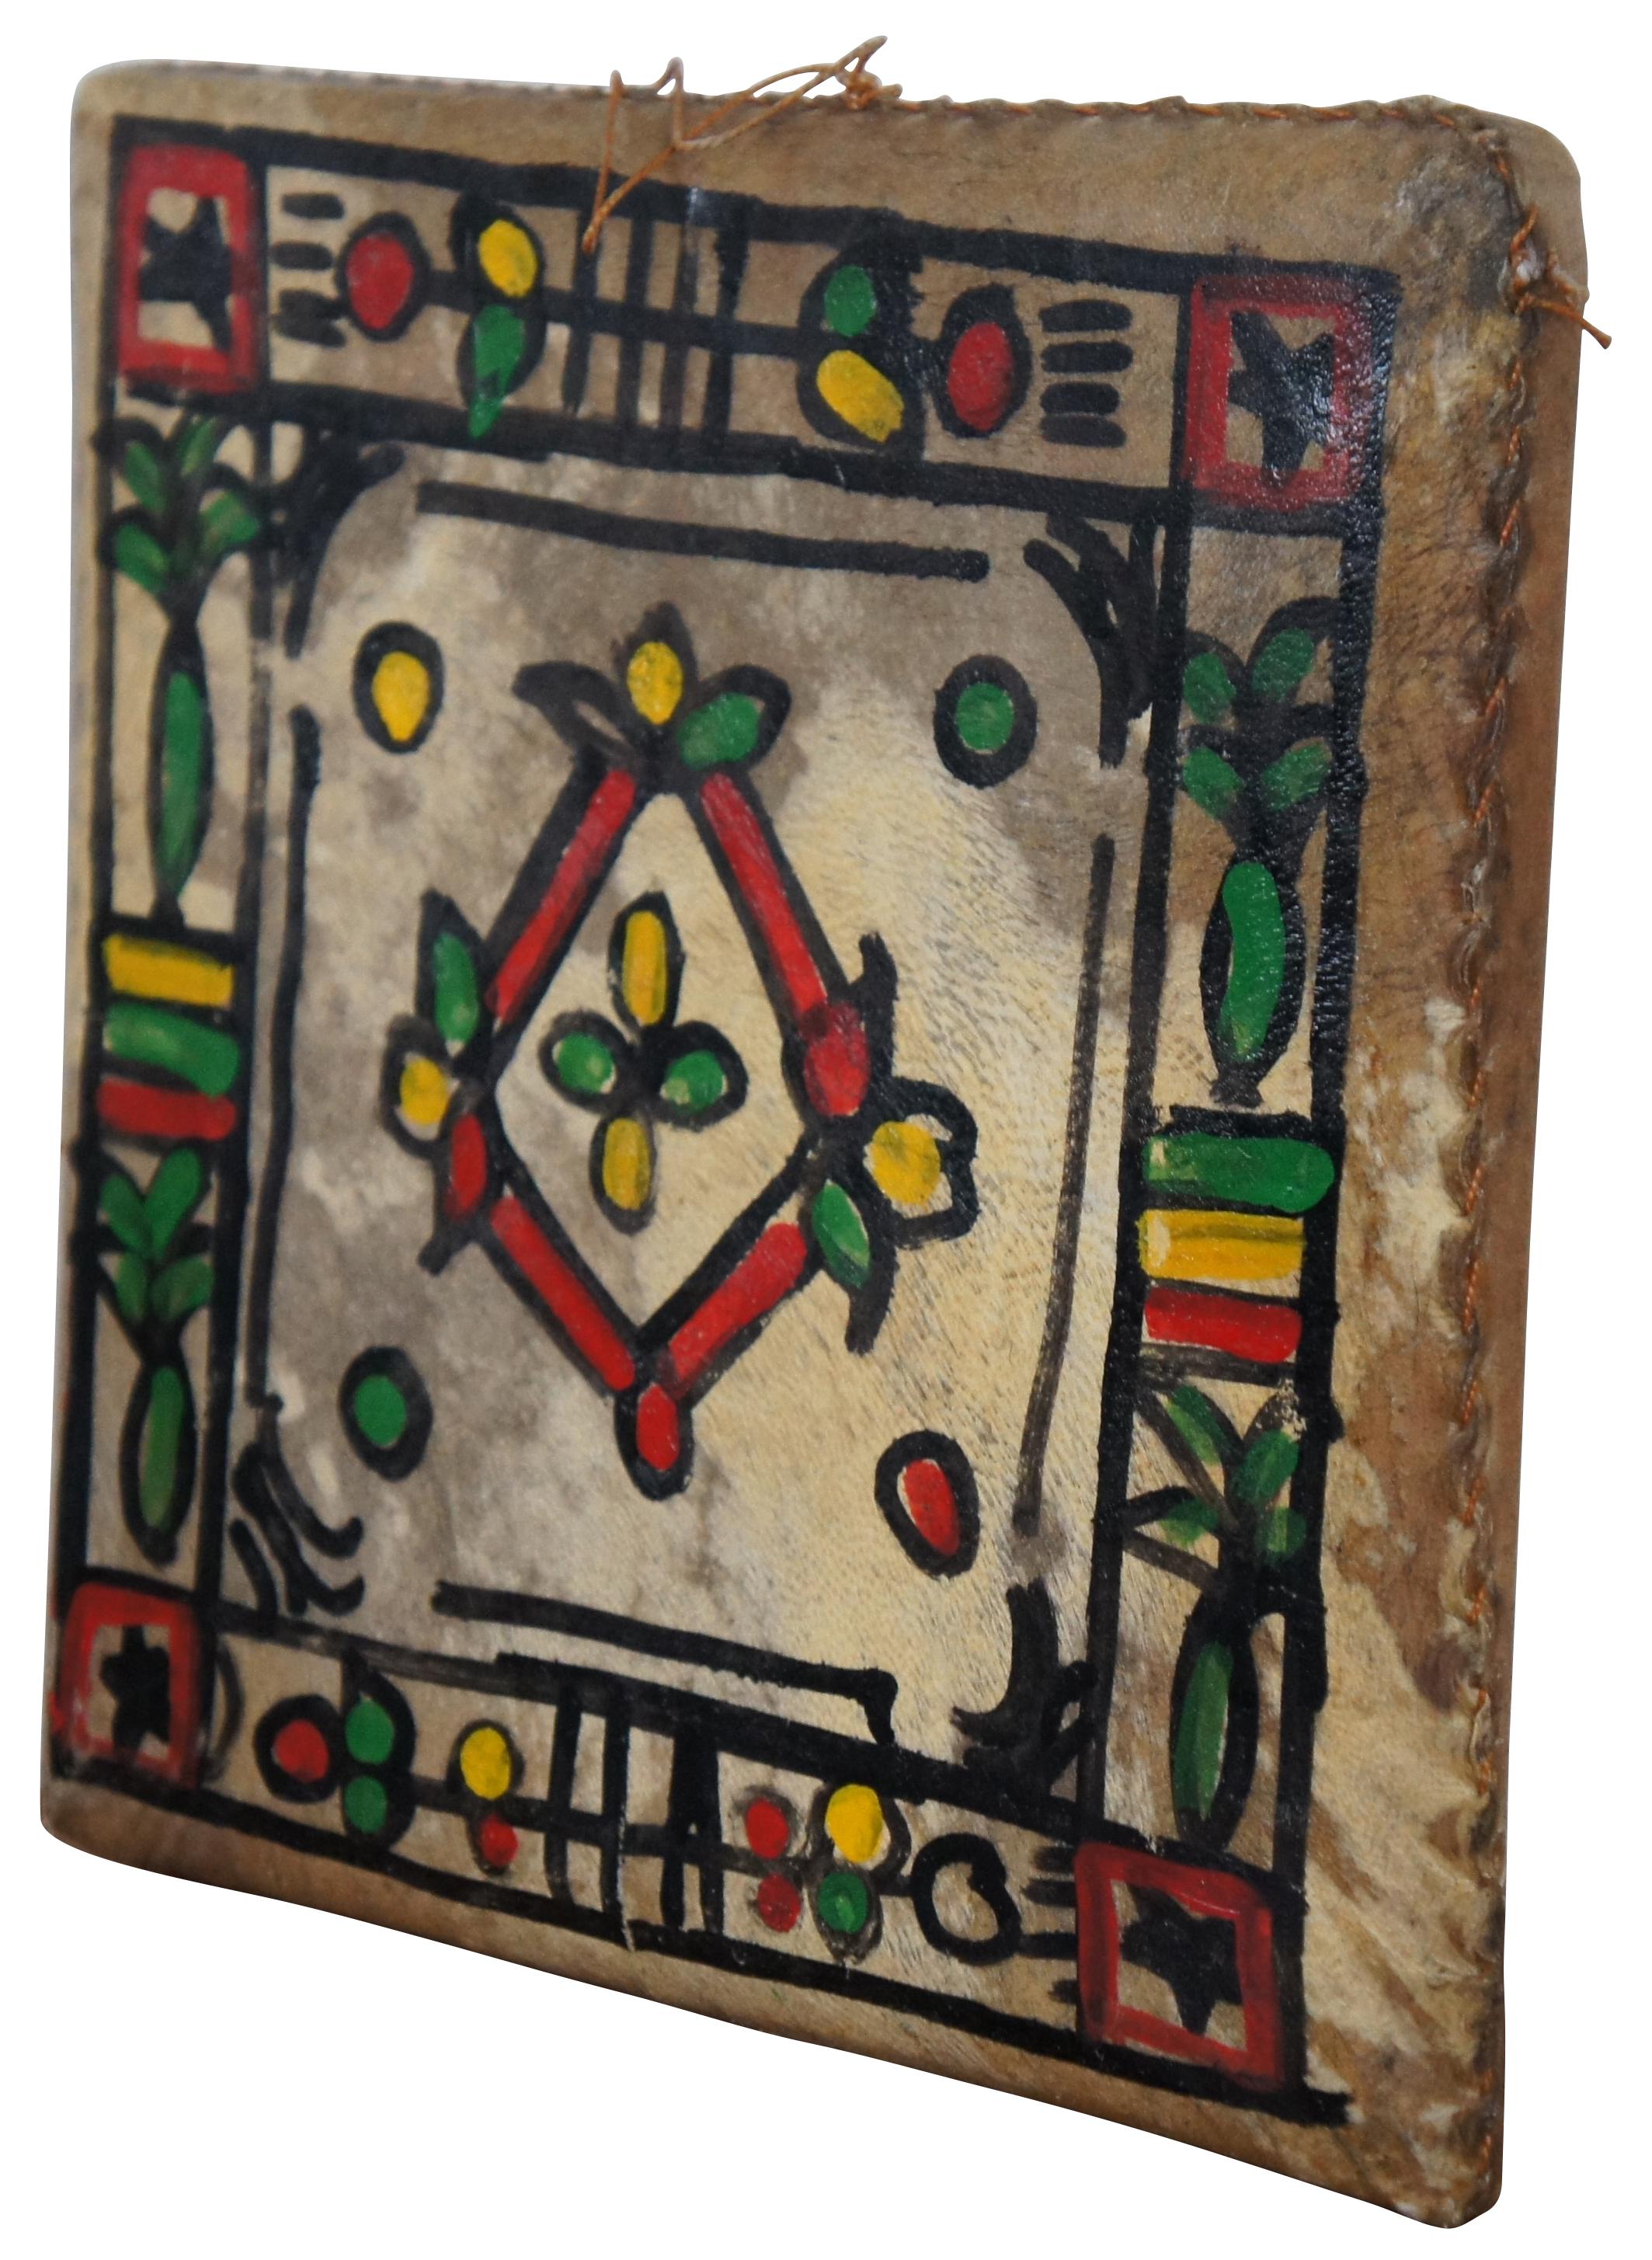 Vintage Berber / Moroccan adufe or square frame drum. This double sided drum is fashioned of a wooden frame covered with stretched leather (usually goat skin), stitched with thick thread and hand painted with a floral motif.

“The adufe is a hand